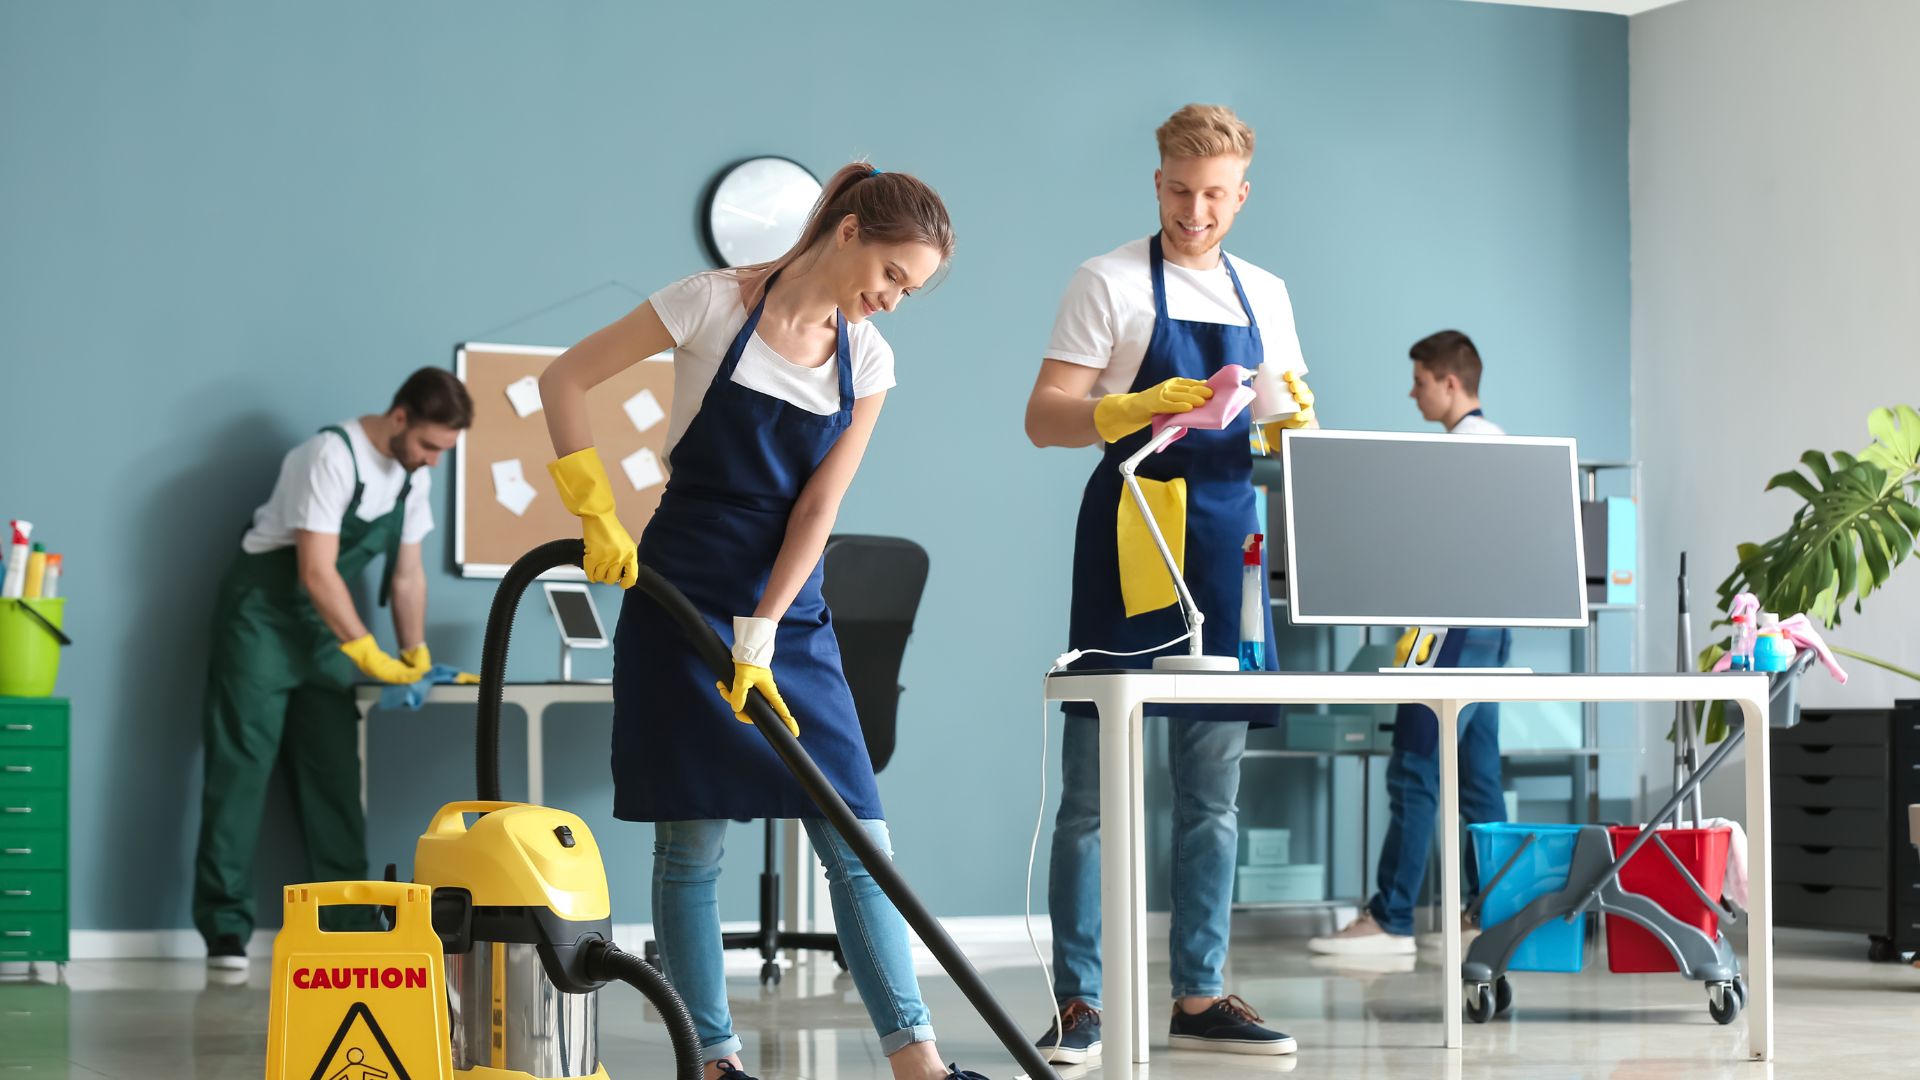 4 cleaners cleaning office